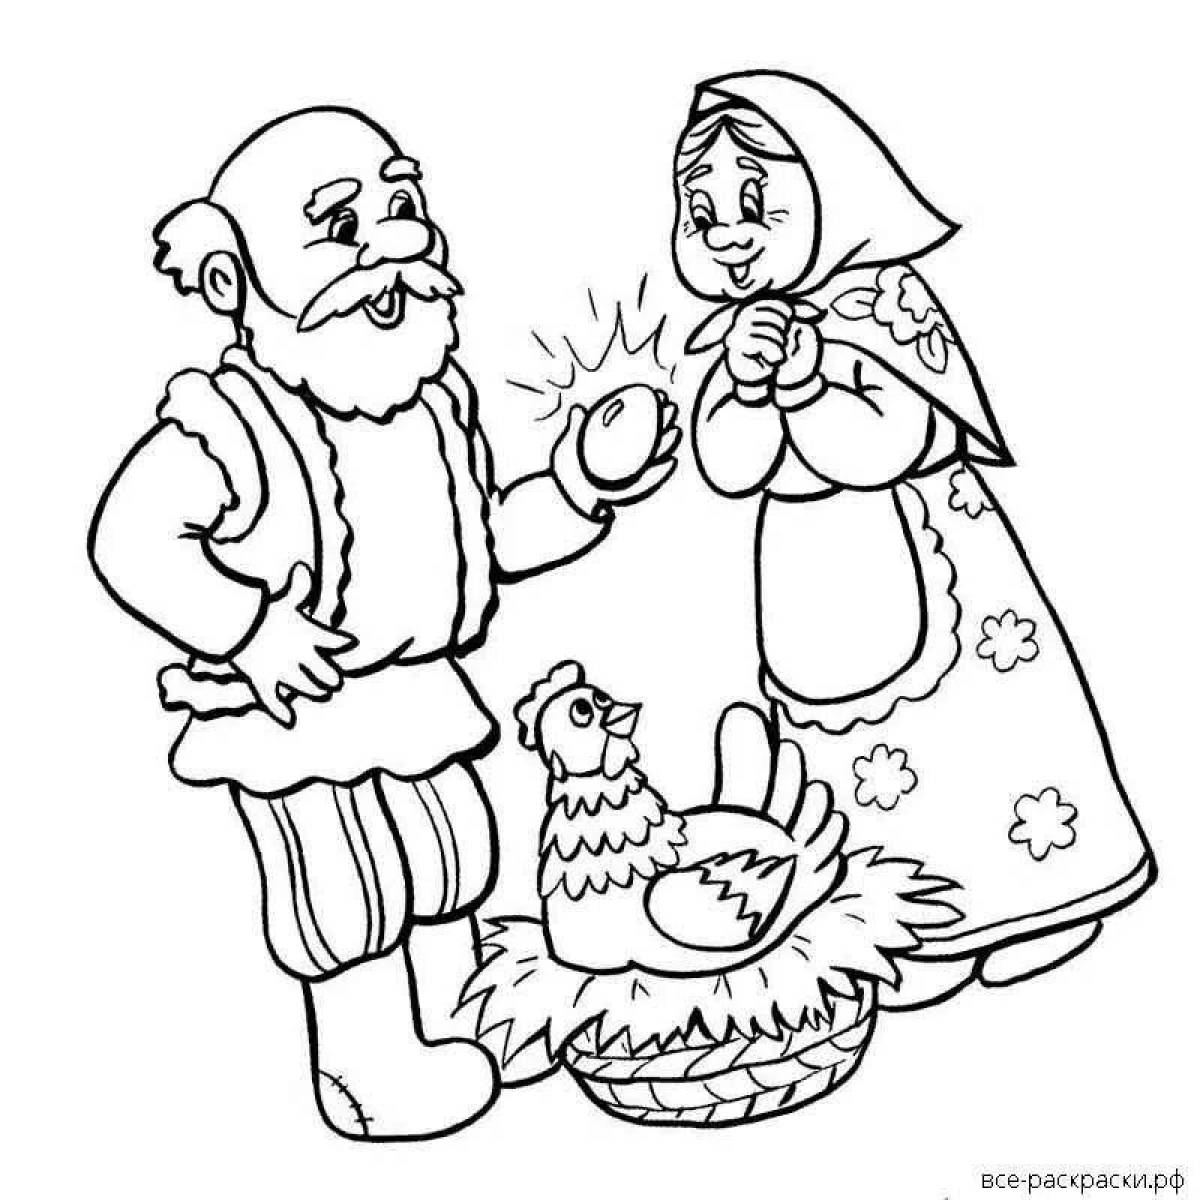 Glamorous grandparents coloring page